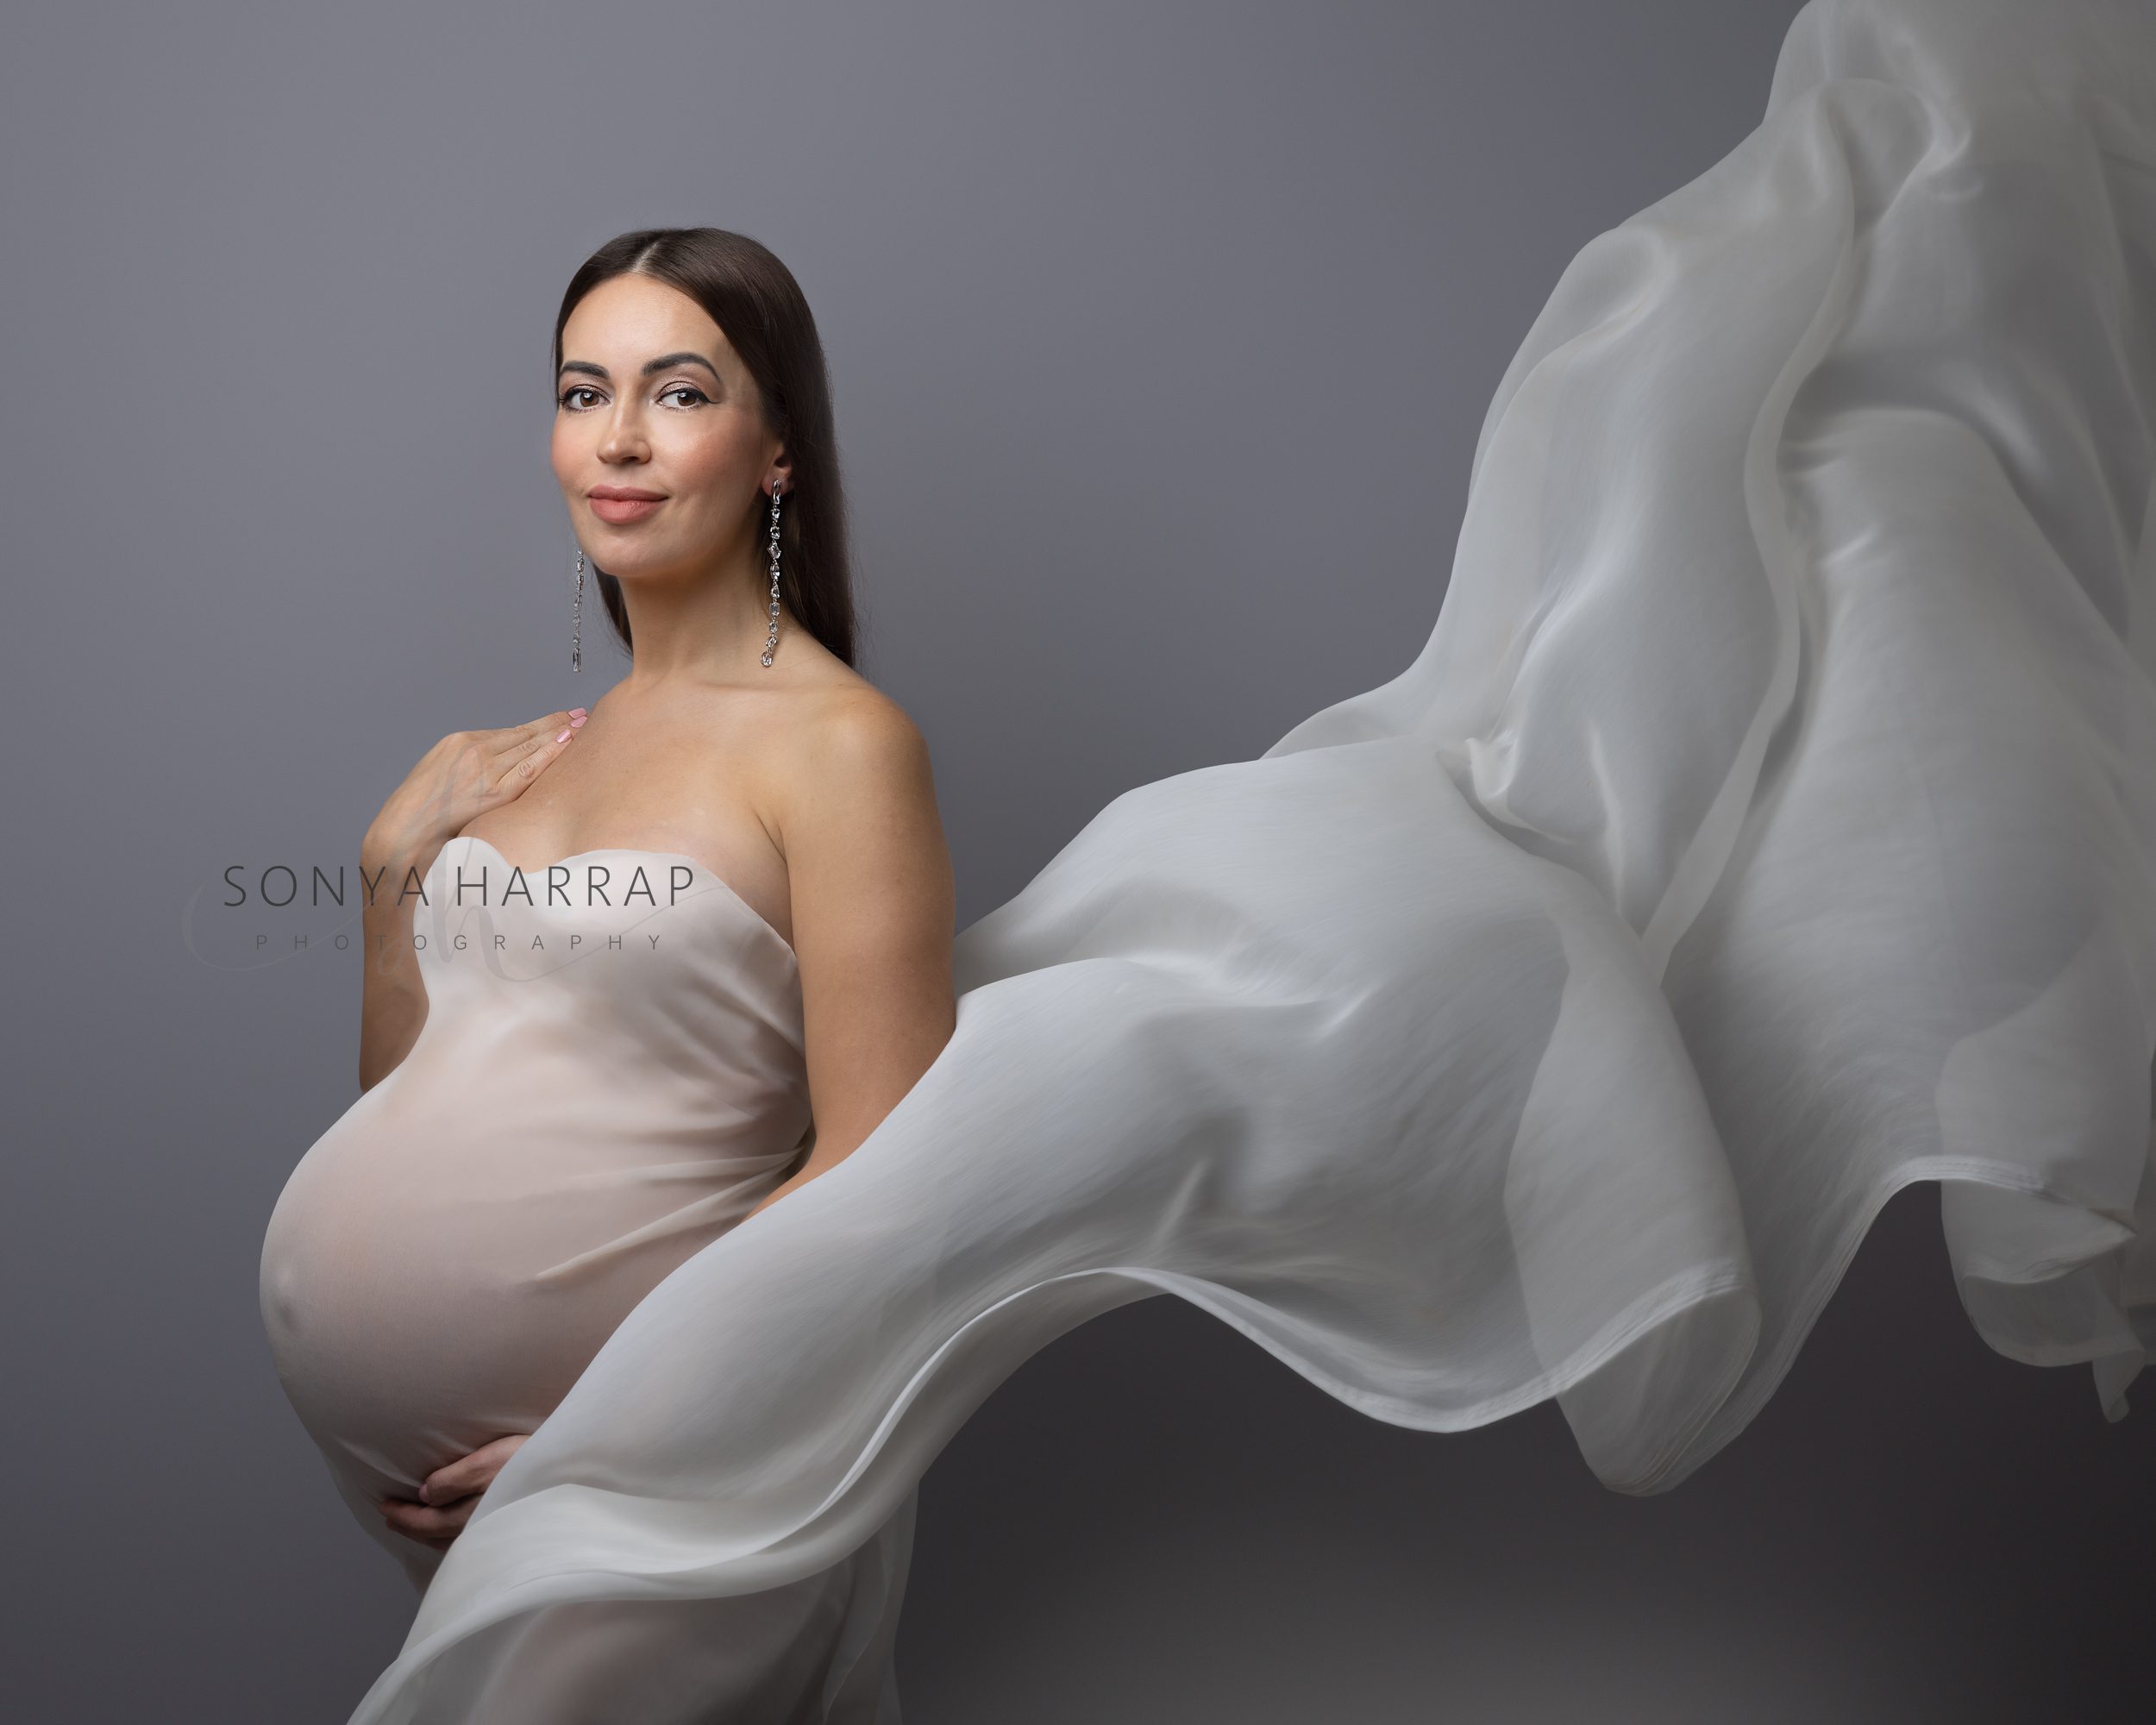 Elegant maternity photos featuring a blossoming mother in a timeless pose